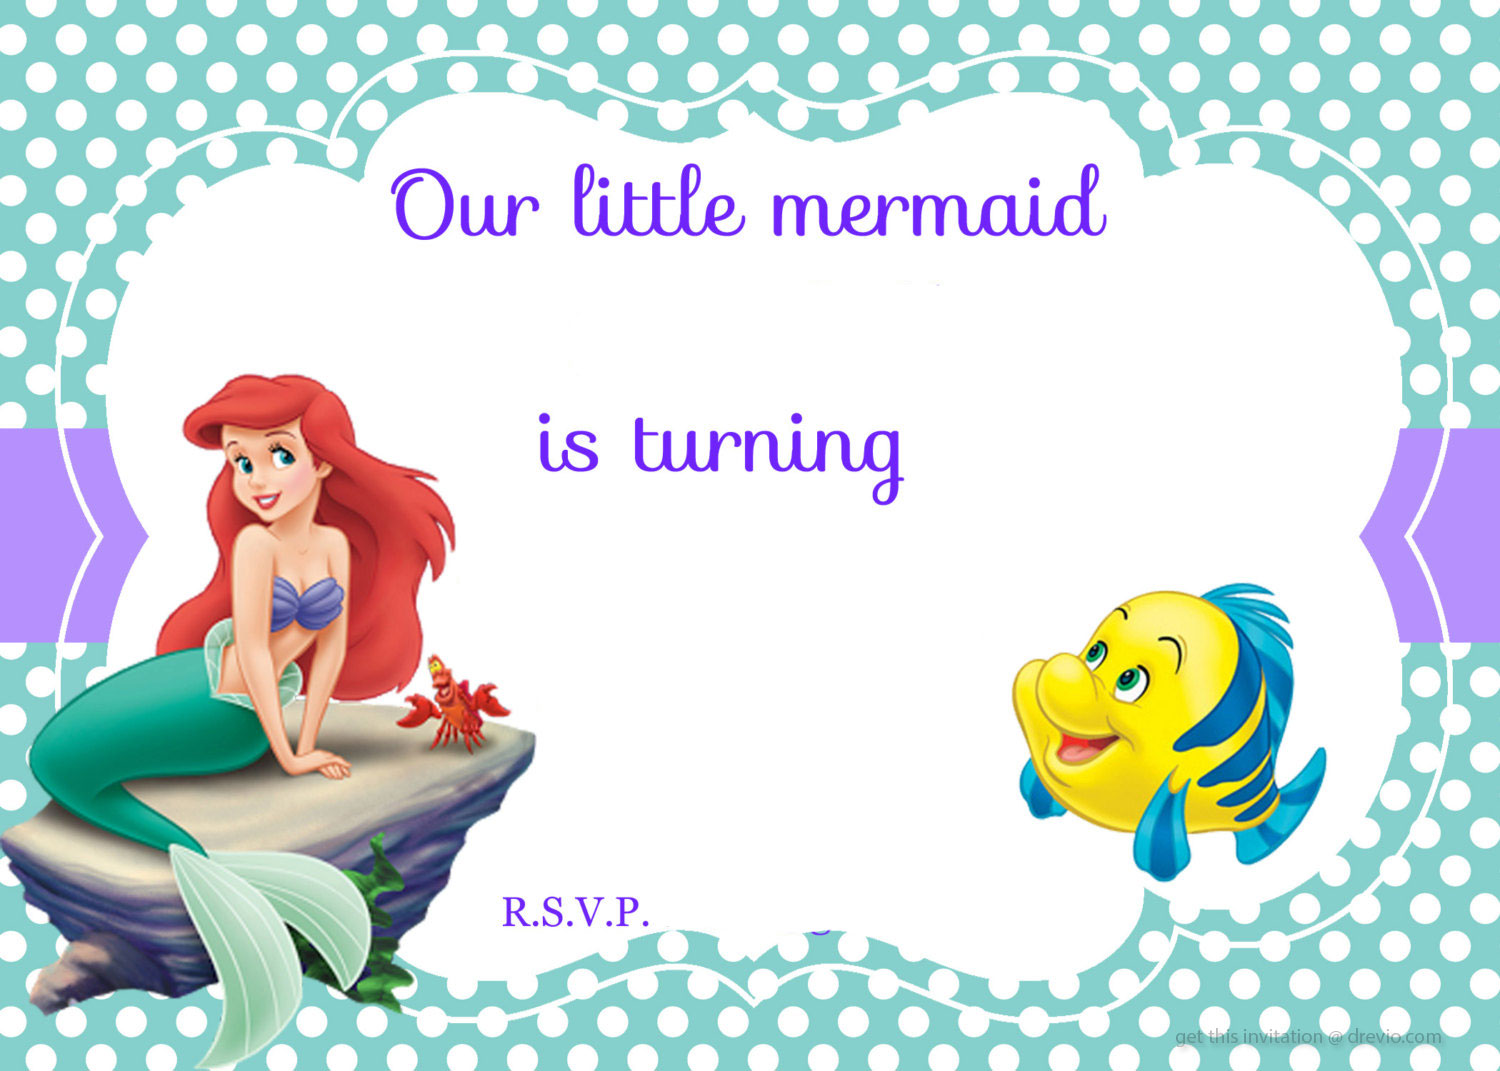 Little mermaid images free. download full